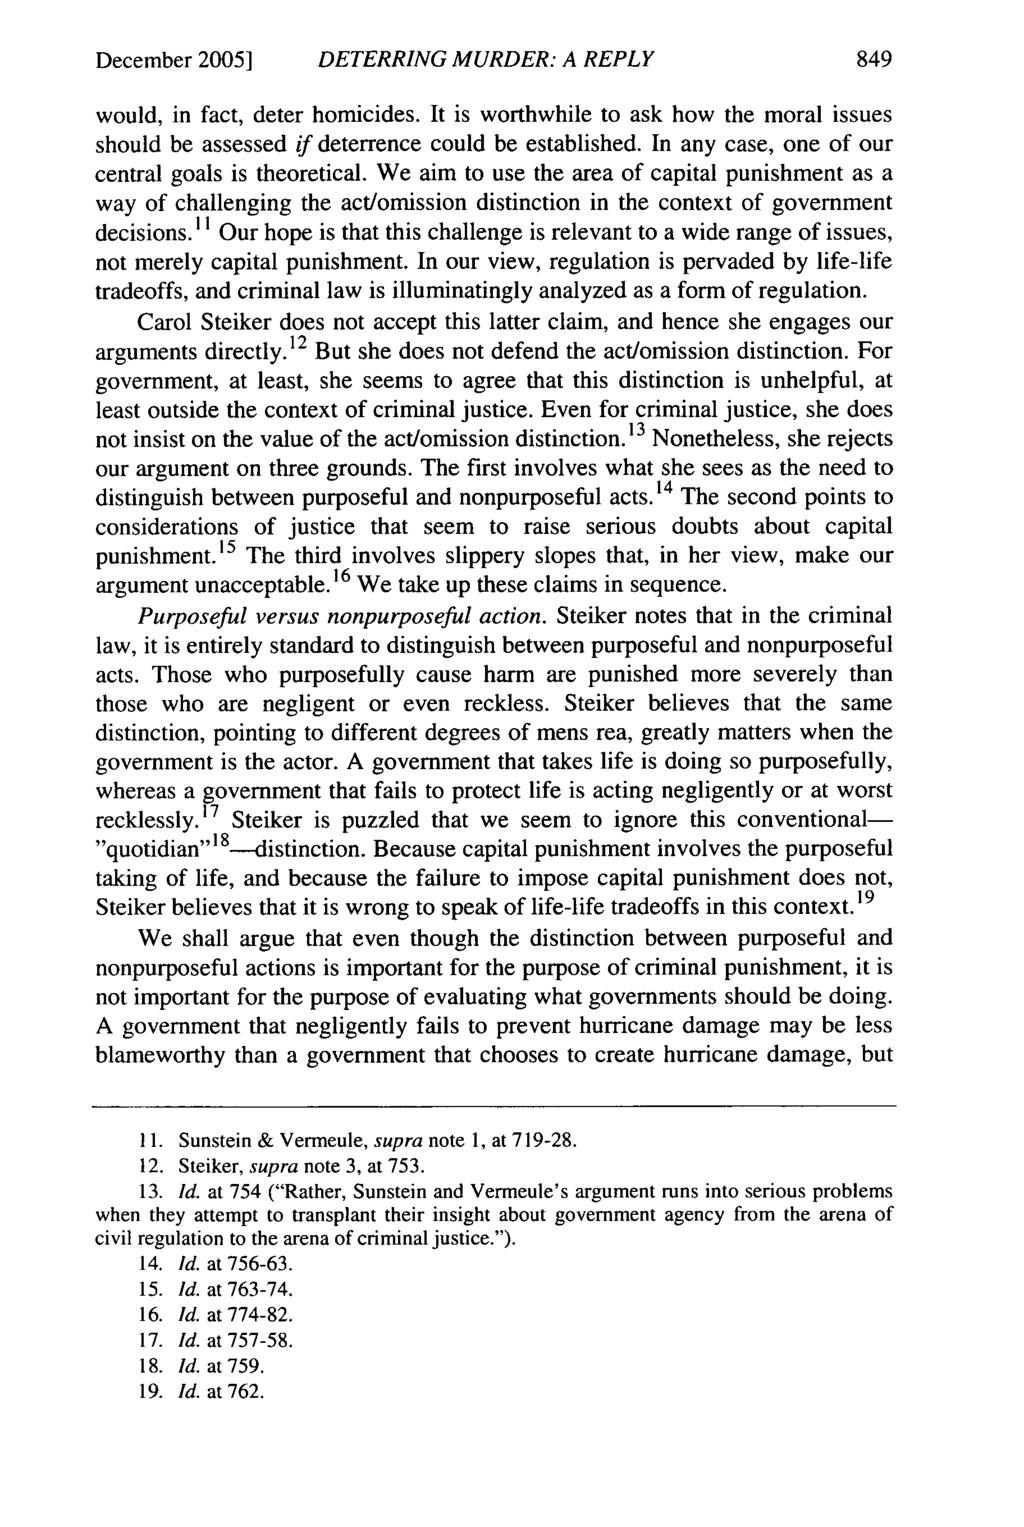 December 2005] DETERRING MURDER: A REPLY would, in fact, deter homicides. It is worthwhile to ask how the moral issues should be assessed if deterrence could be established.